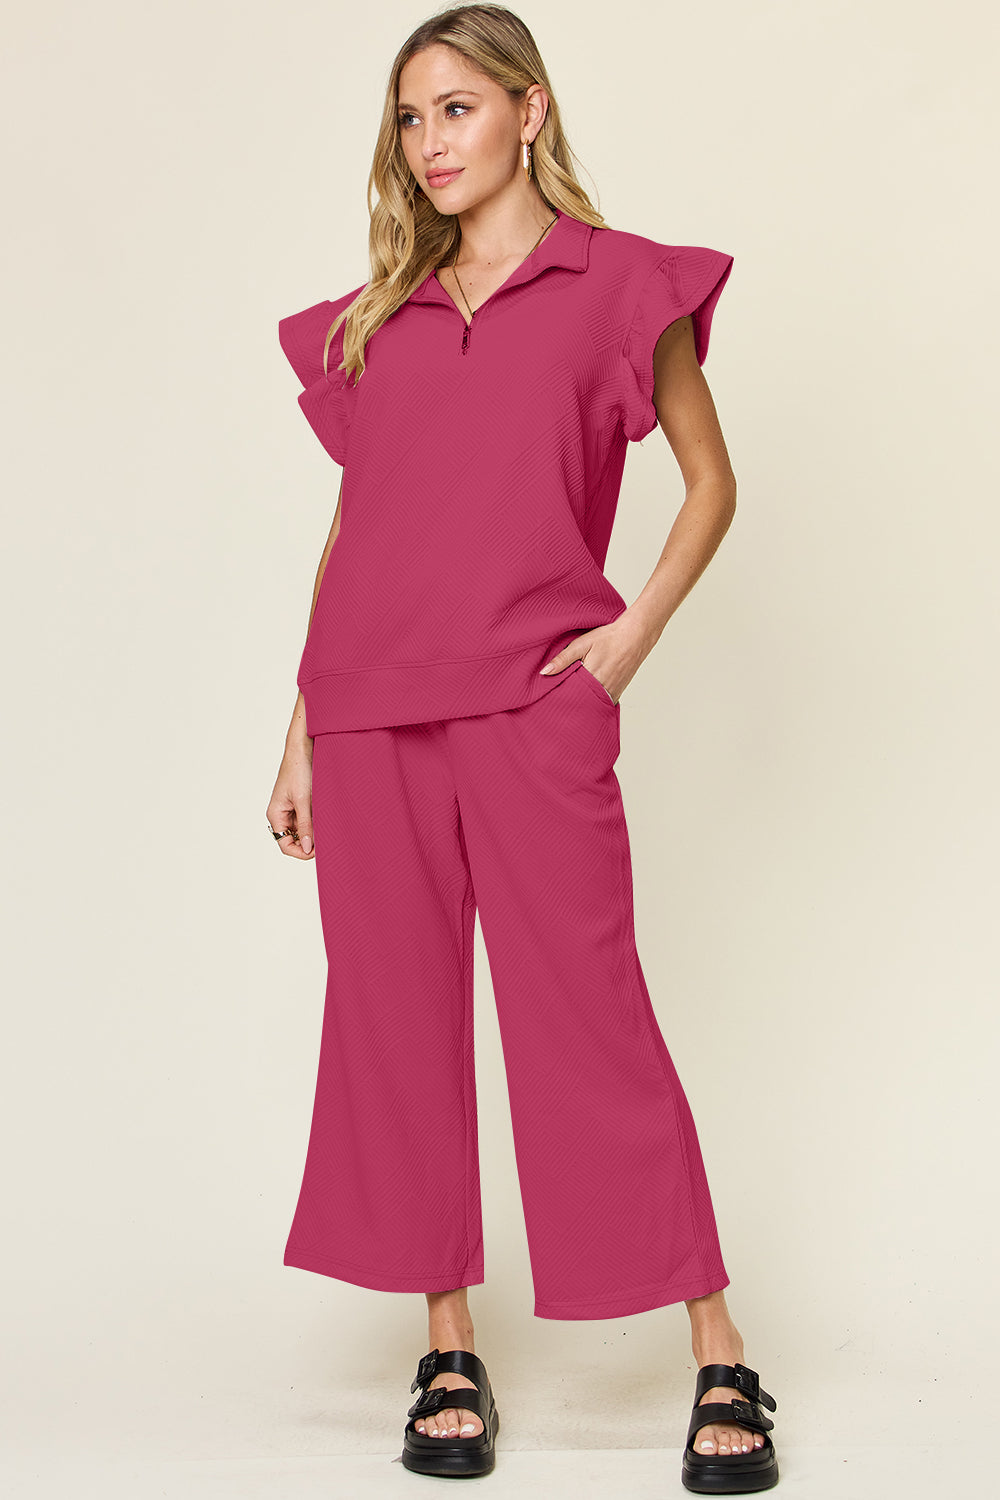 Explore More Collection - Double Take Texture Ruffle Short Sleeve Top and Drawstring Wide Leg Pants Set